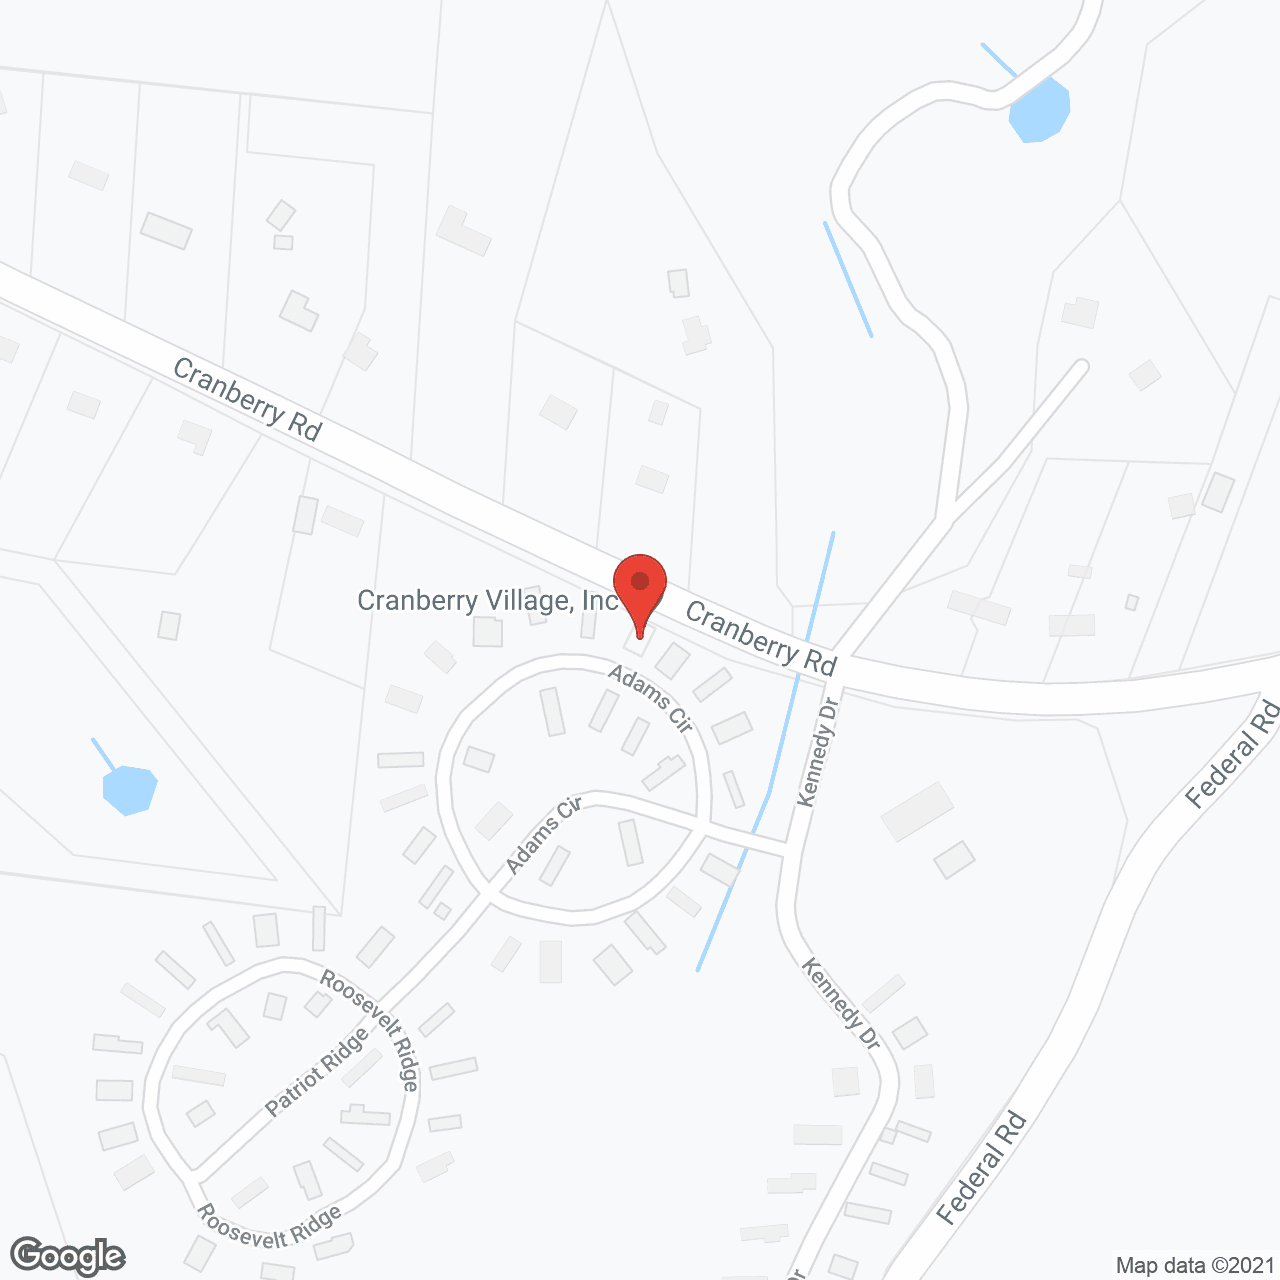 Cranberry Village Inc in google map